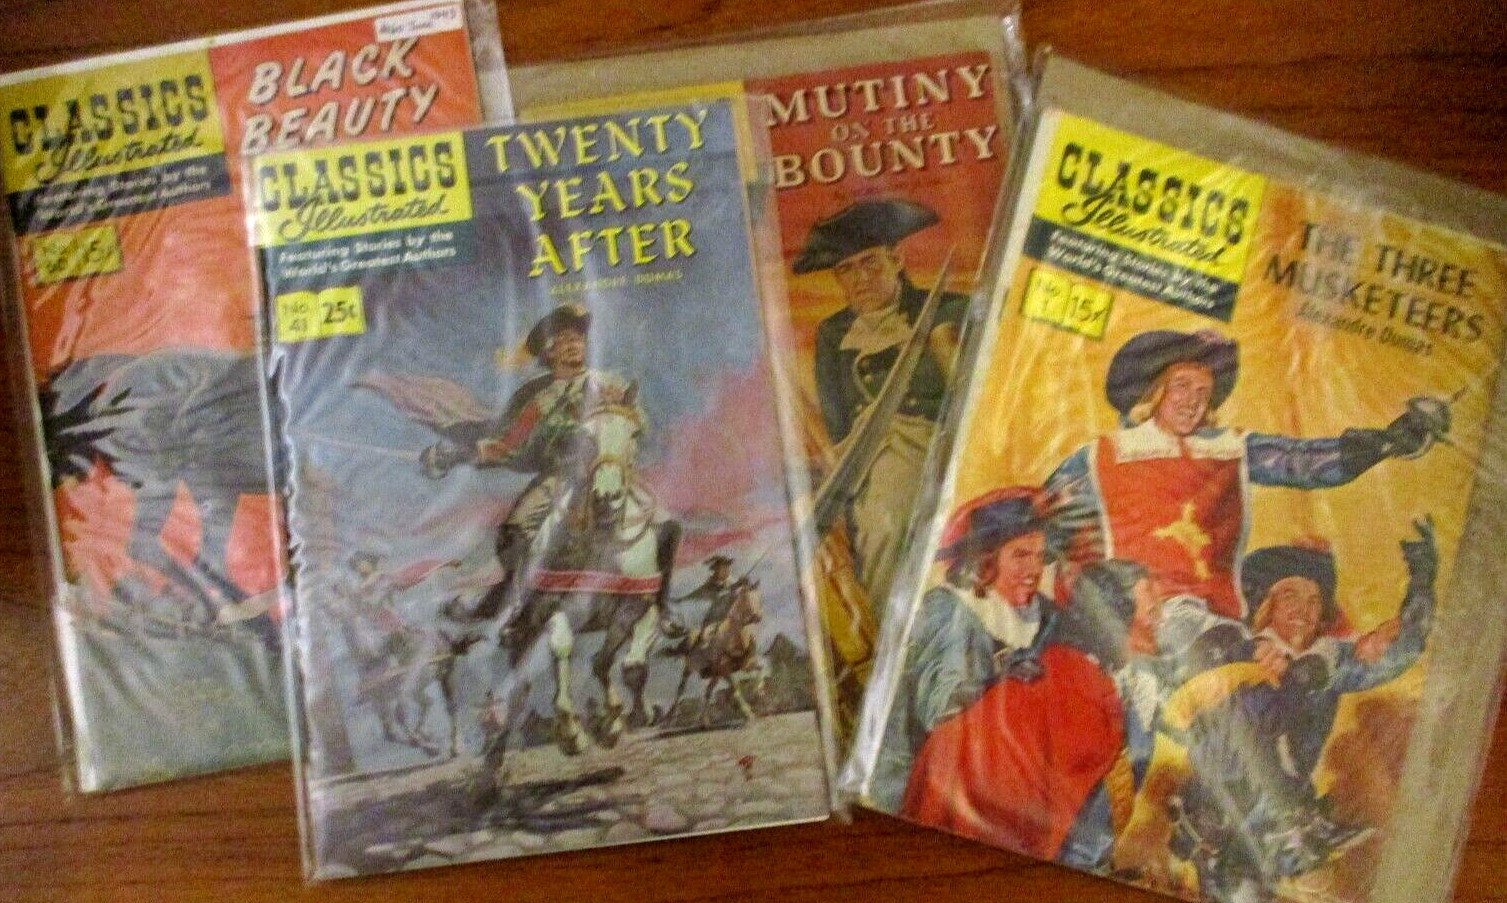 1950's '60's CLASSICS ILLUSTRATED COMICS 3 Musketeers Mutiny on the Bounty + 2